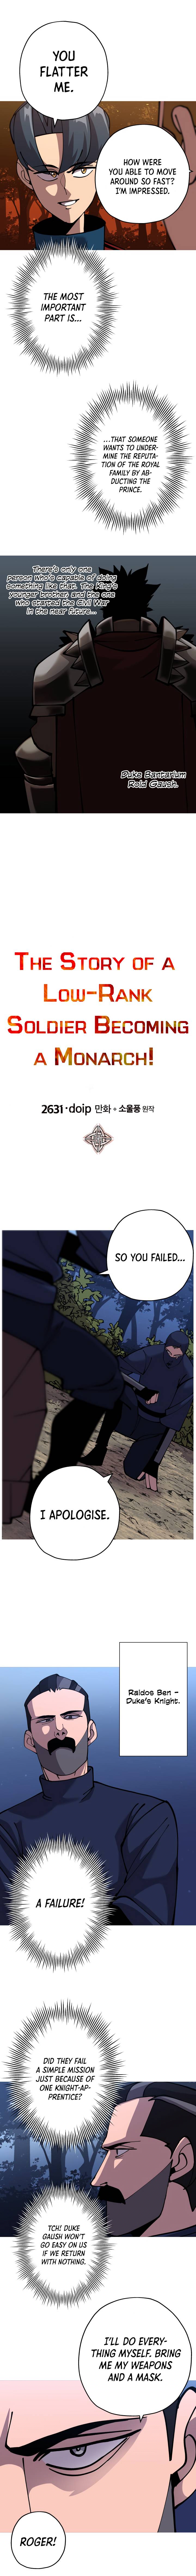 The Story of a Low-Rank Soldier Becoming a Monarch Chapter 32 - page 3